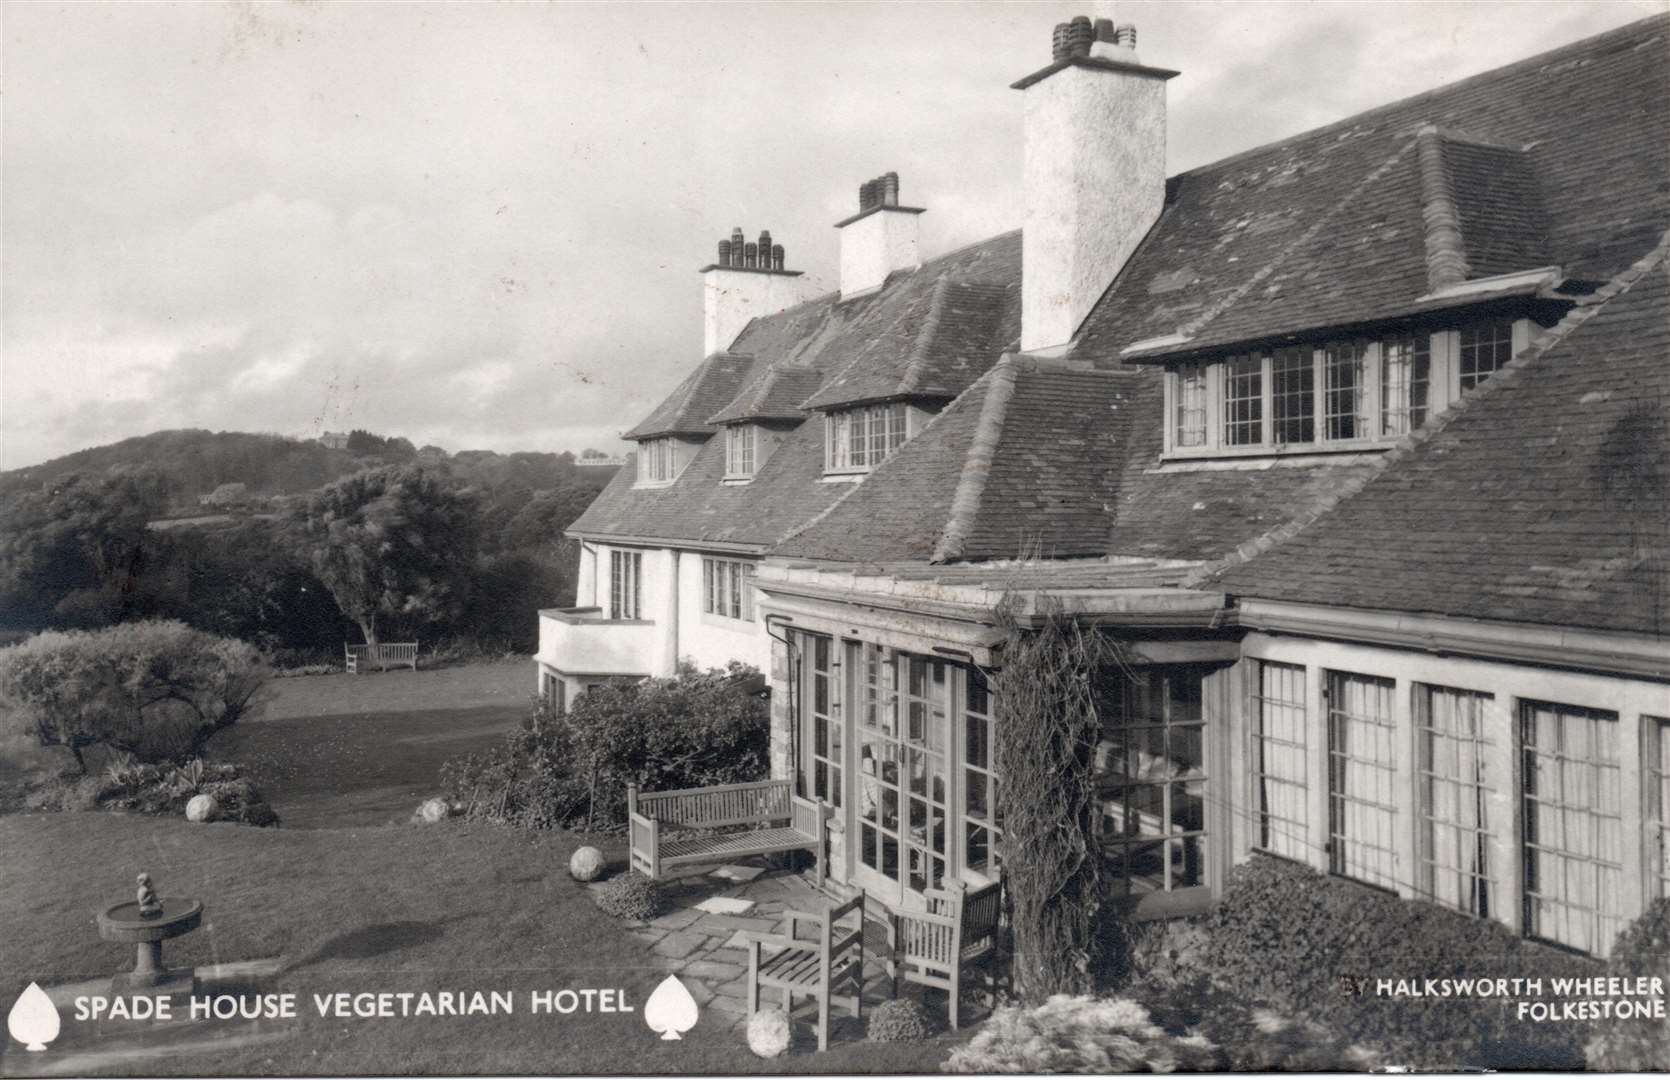 Spade House was later turned into a hotel. Picture courtesy of Alan Taylor